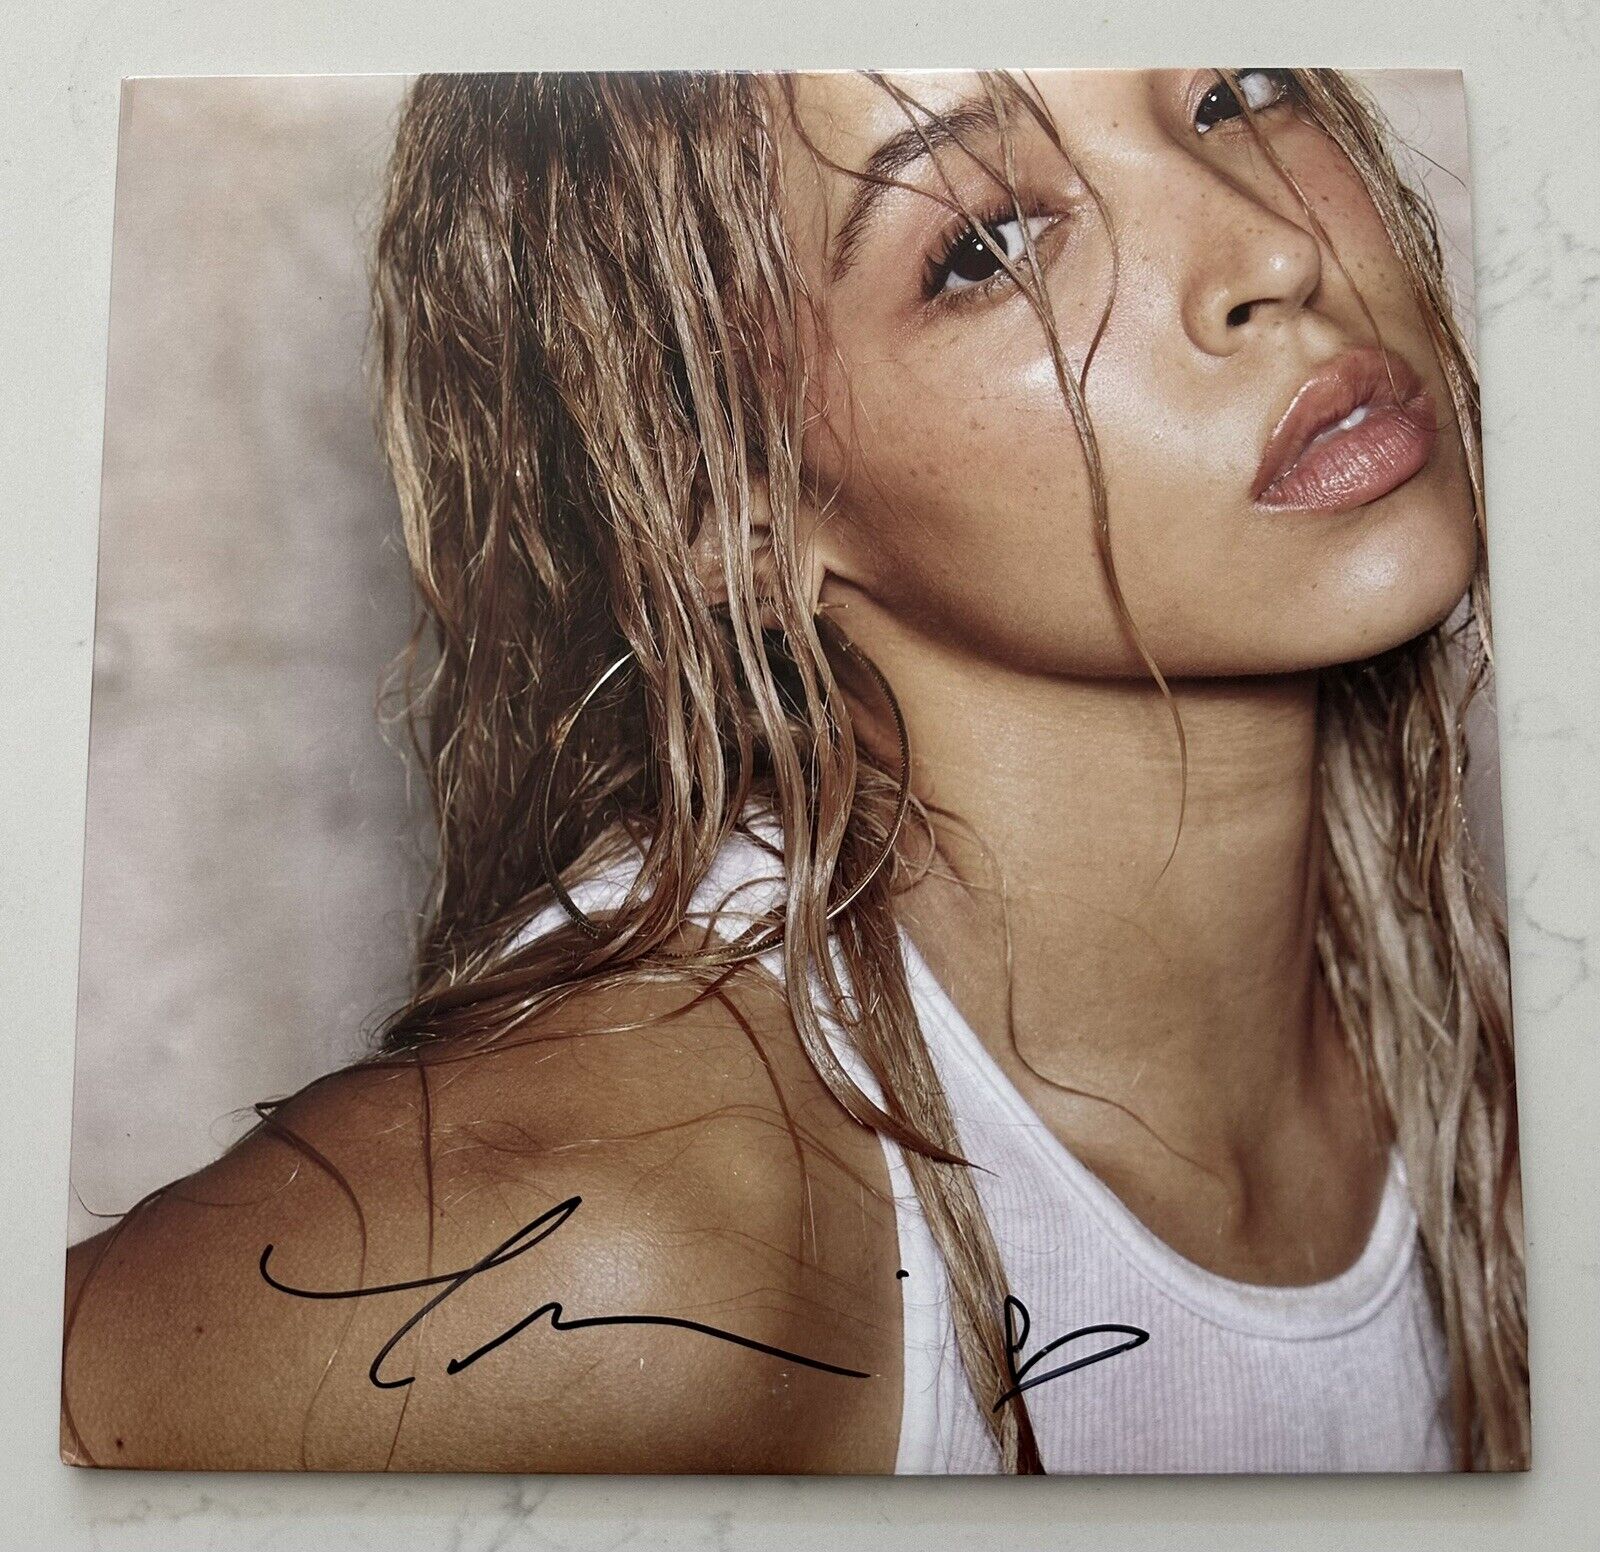 *SINGED* Tinashe BB/ANG3L Vinyl LP Signed Autographed New - In Hand - 